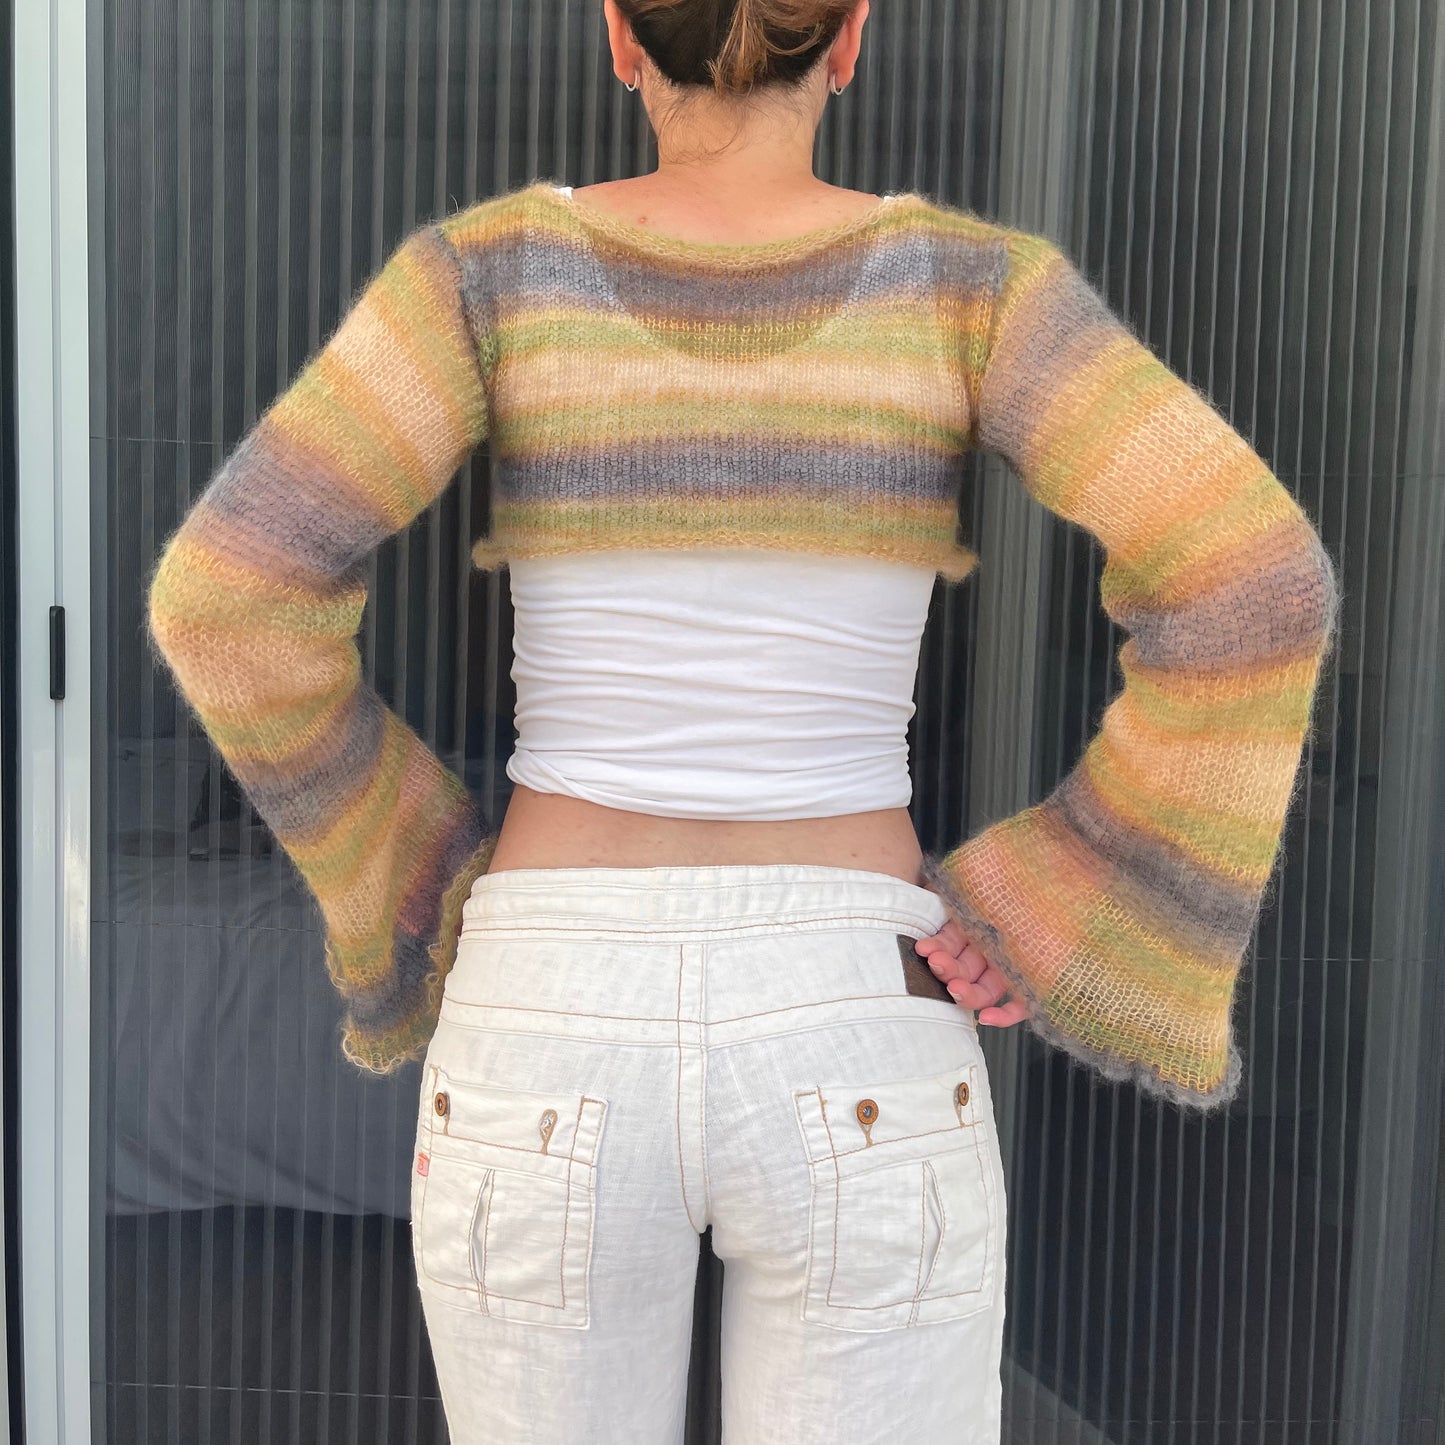 Handmade knitted mohair cropped jumper in ombré earth tones